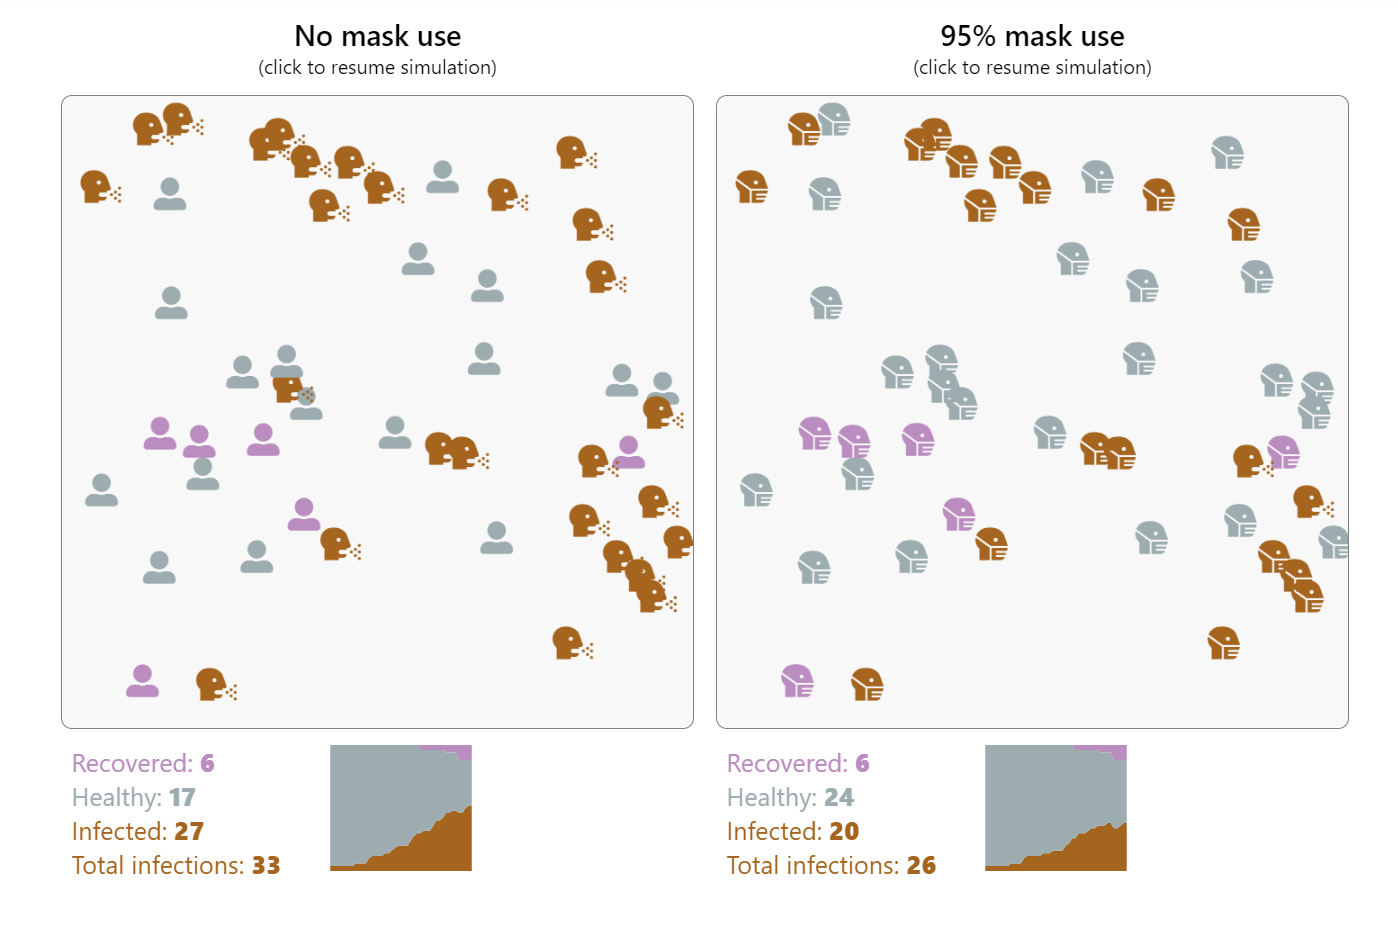 Simulation showing the spread of COVID-19 in groups with no masks compared to 95% mask use